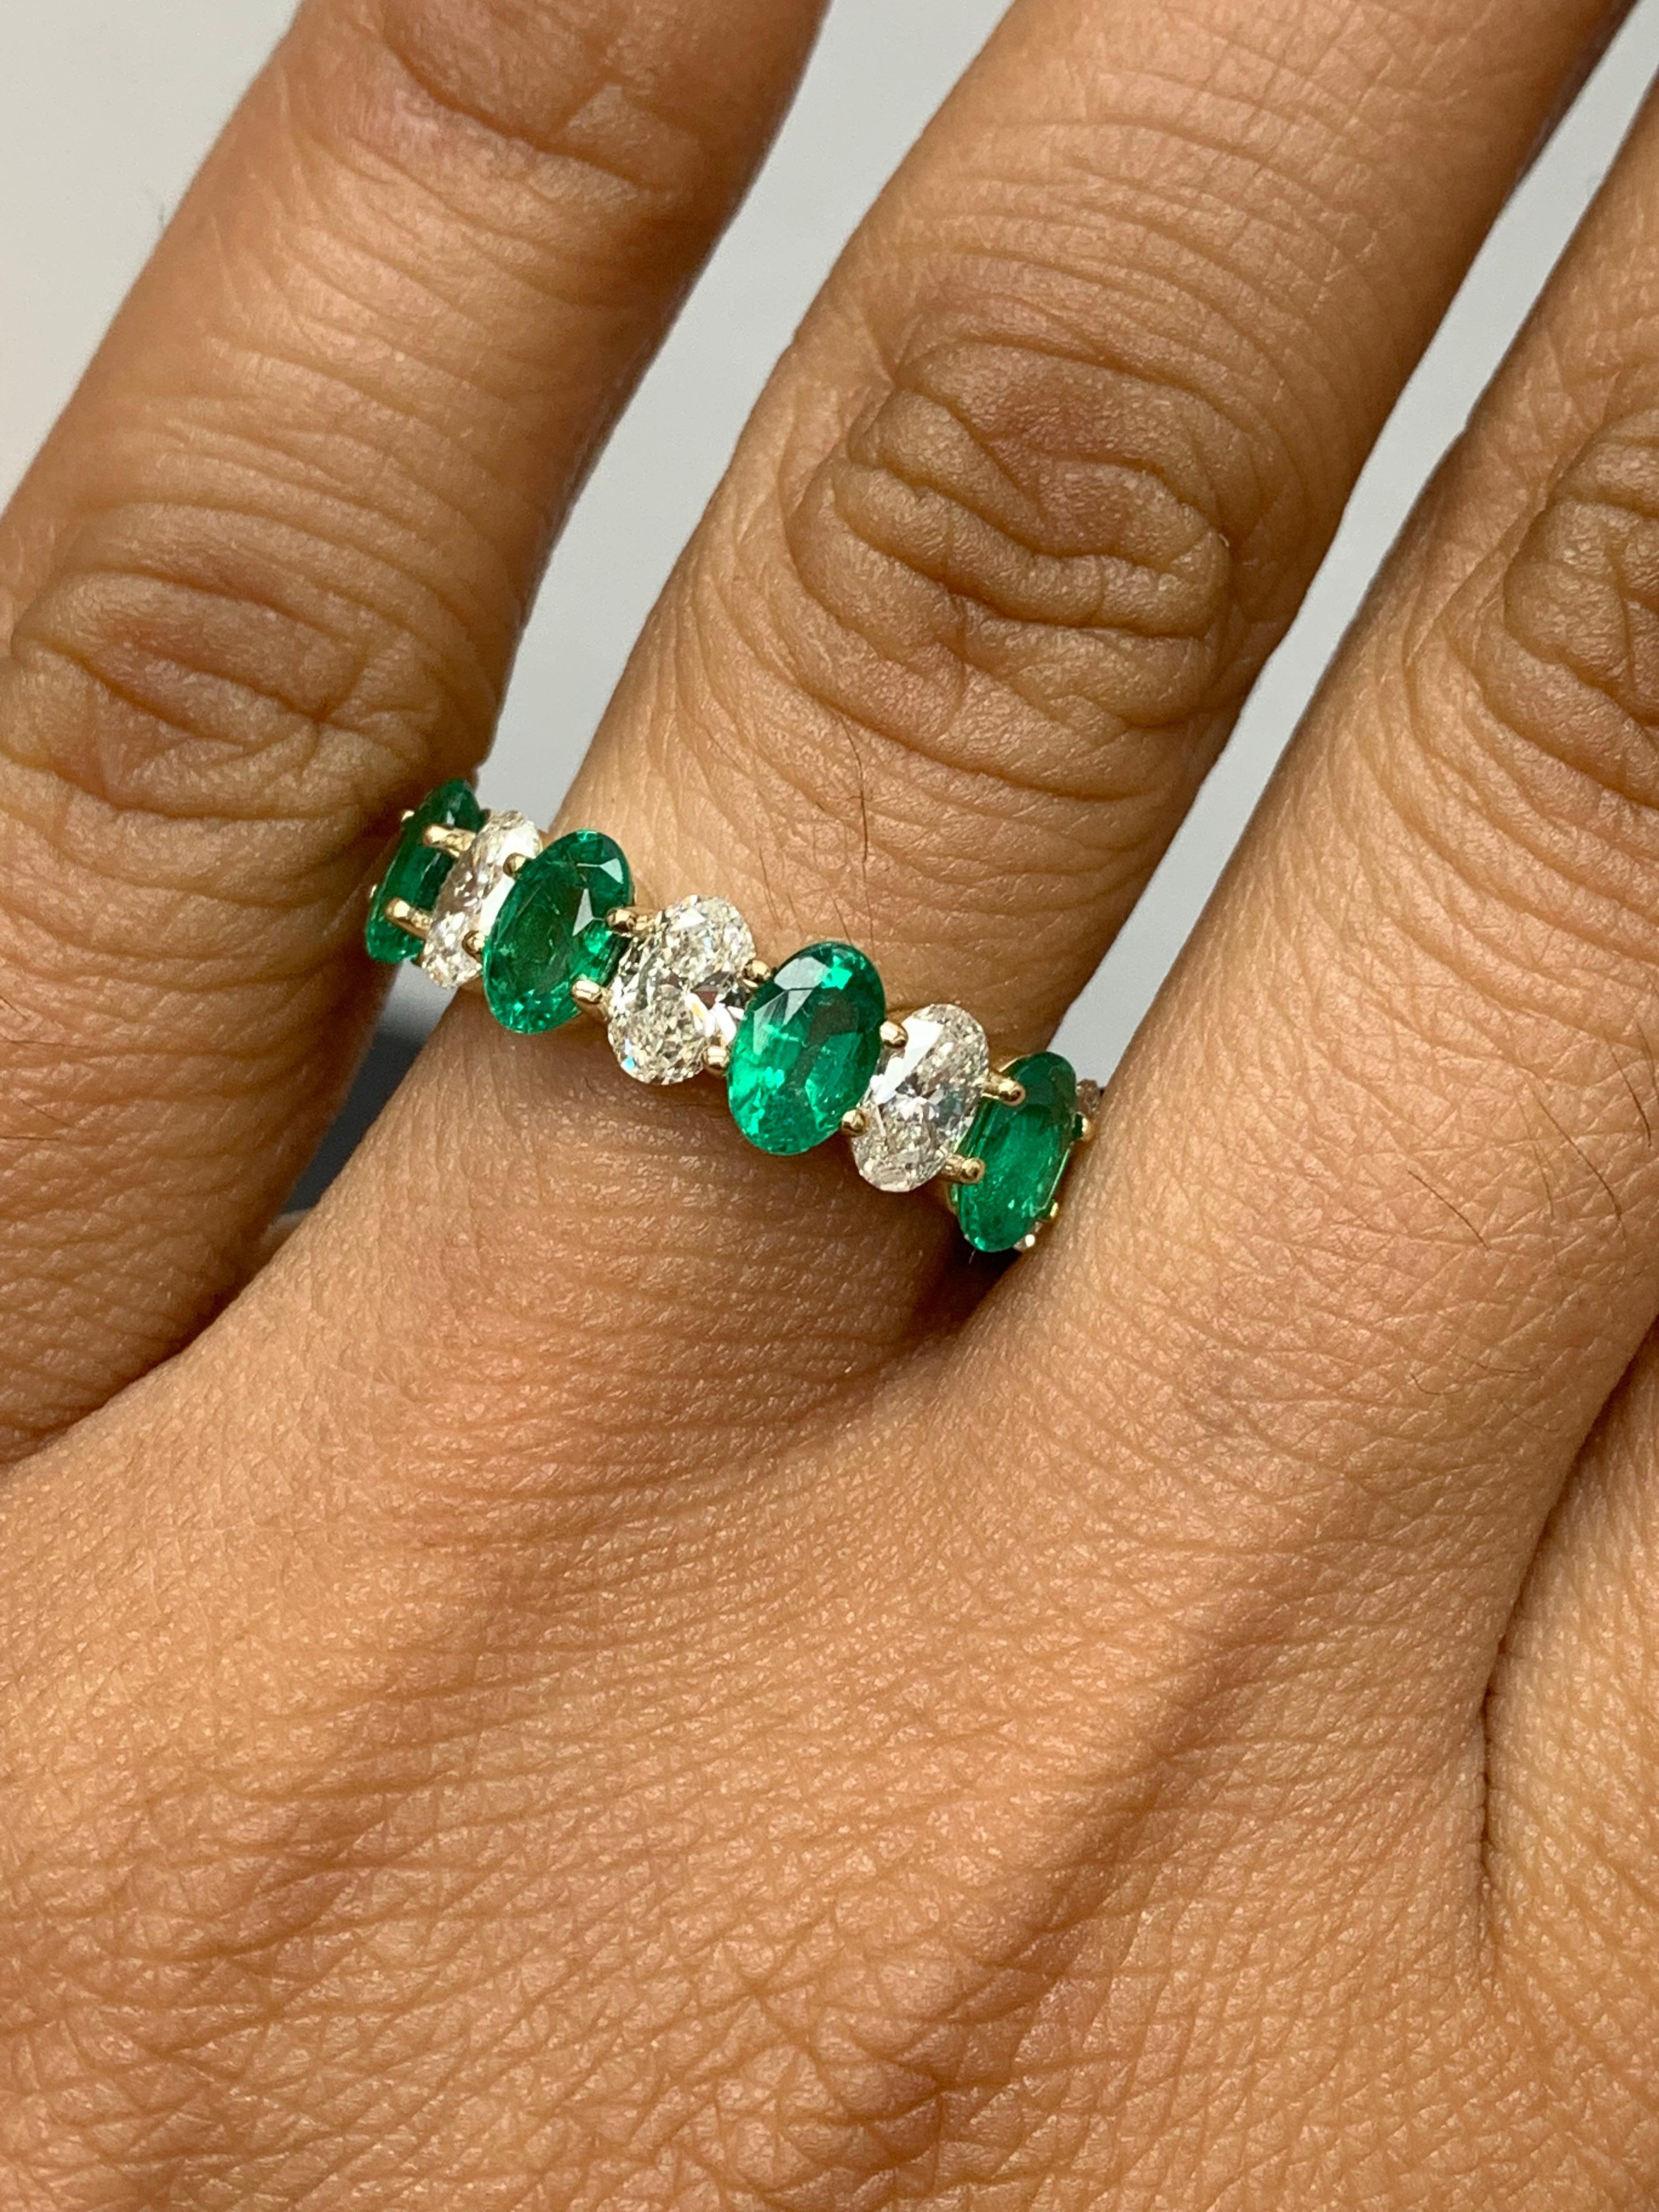 A fascinating gemstone wedding band 9 stone style showcasing lush green 5 oval cut emeralds weighing 1.89 carats total, alternating to these emeralds are 4 oval cut brilliant colorless diamonds weighing 1.26 carats, Made in 14K Yellow Gold, Size 6.5